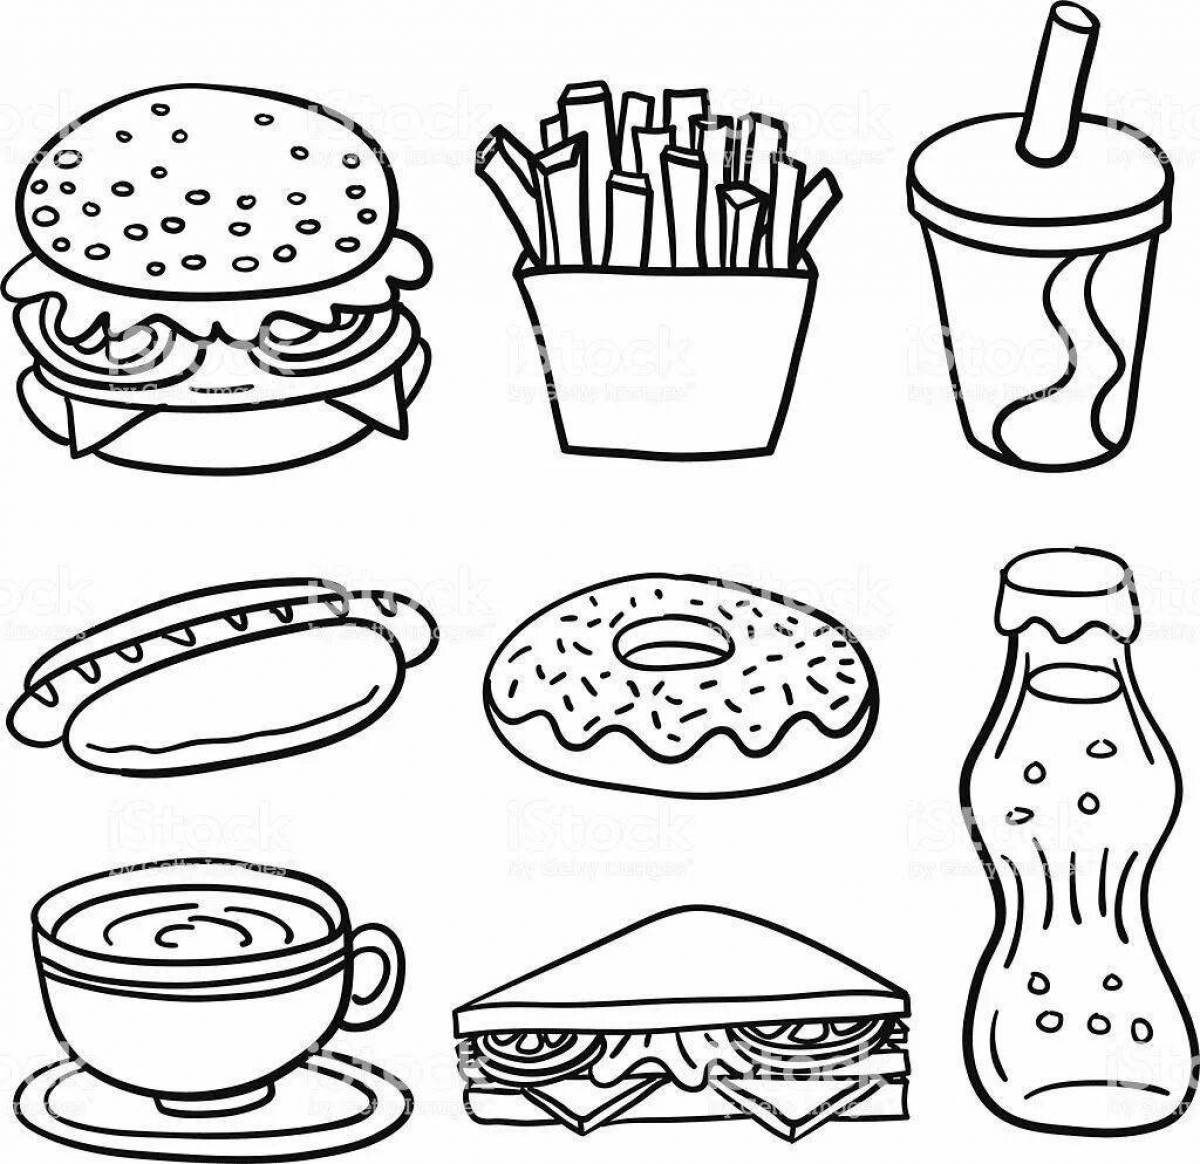 Coloring page of healthy food with vitamins